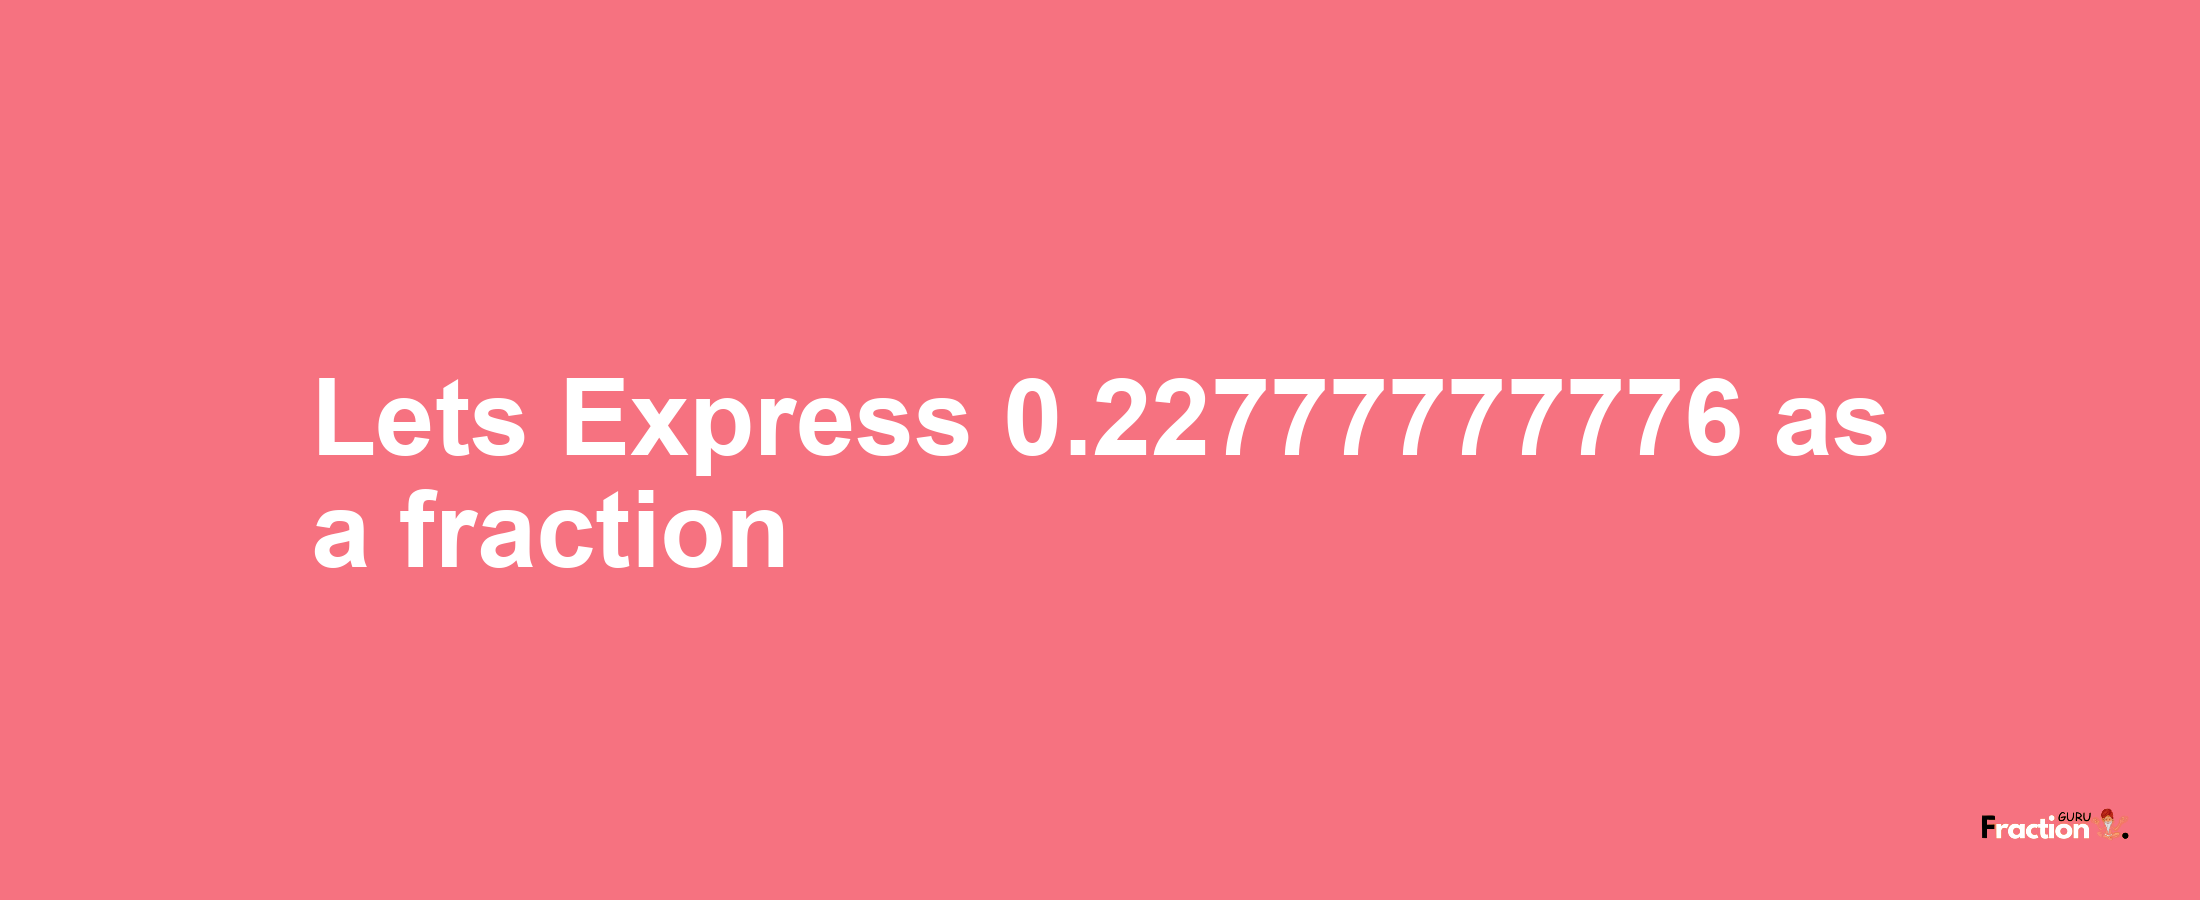 Lets Express 0.22777777776 as afraction